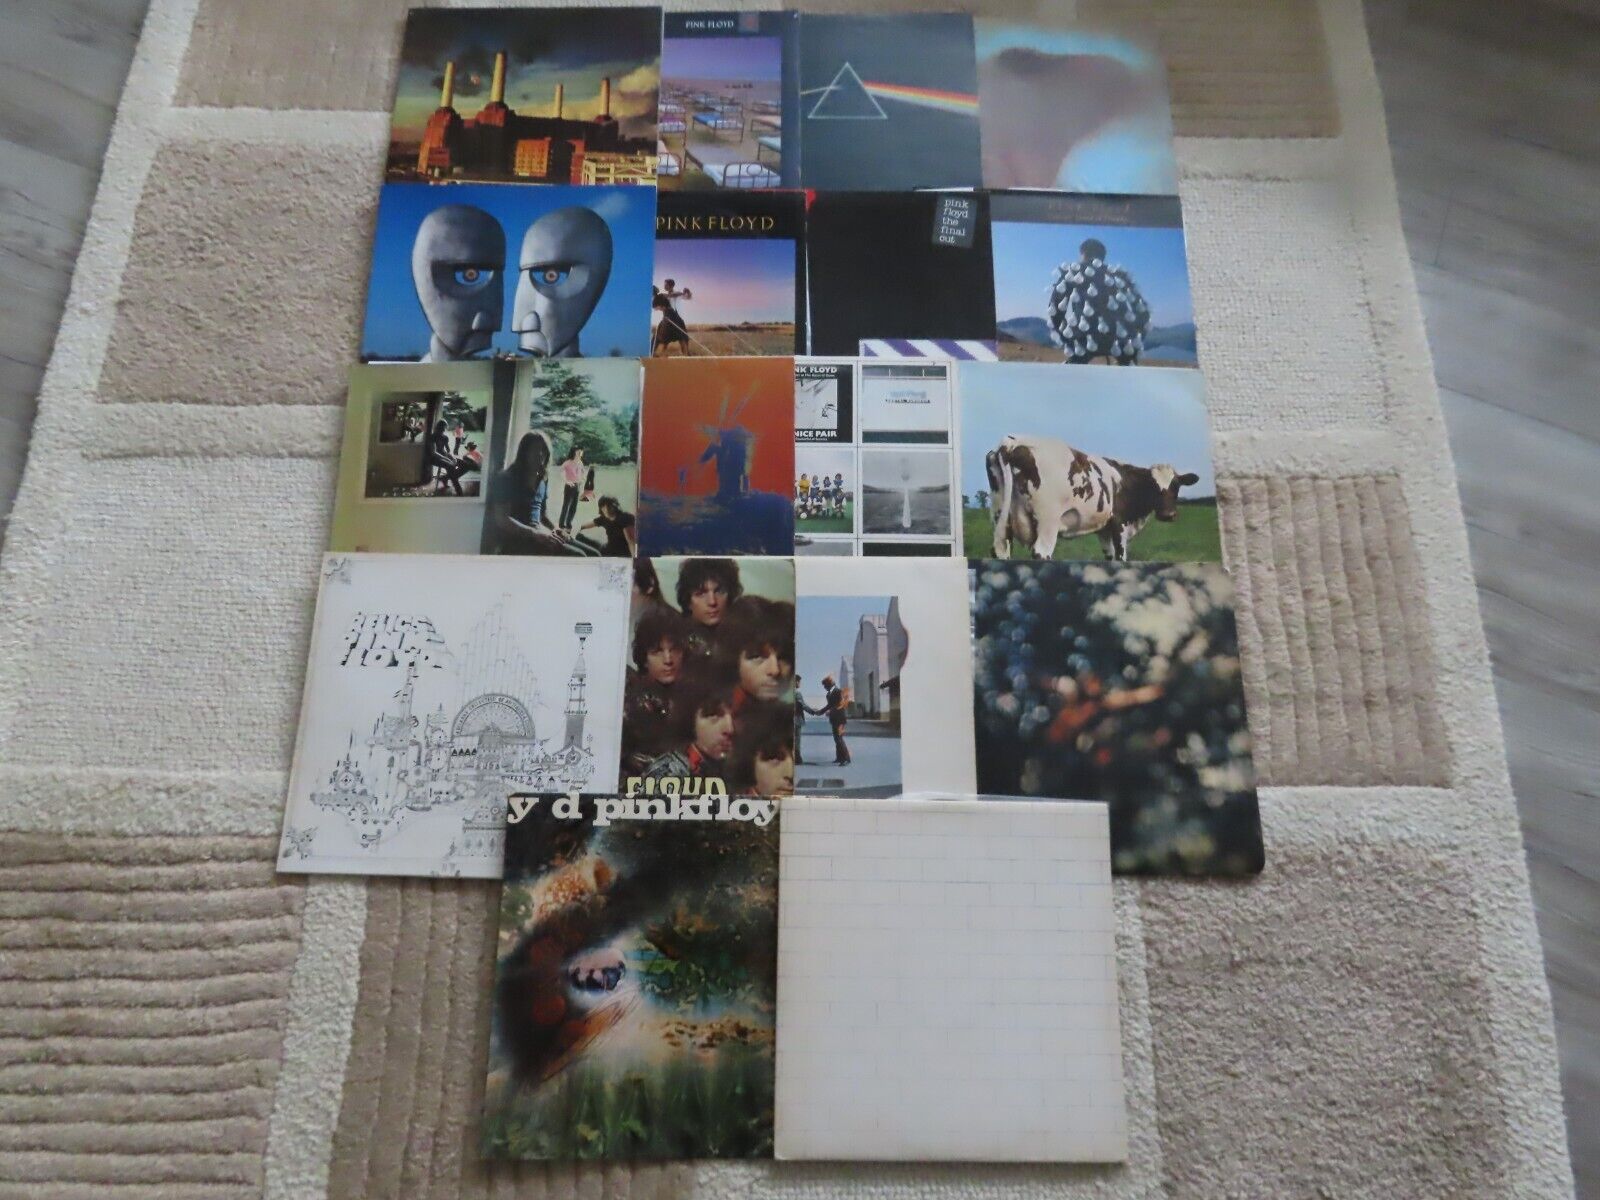 Pic 2 PINK FLOYD "Dark side, Wish you were here, the wall" + 15 many UK 1st pressings.